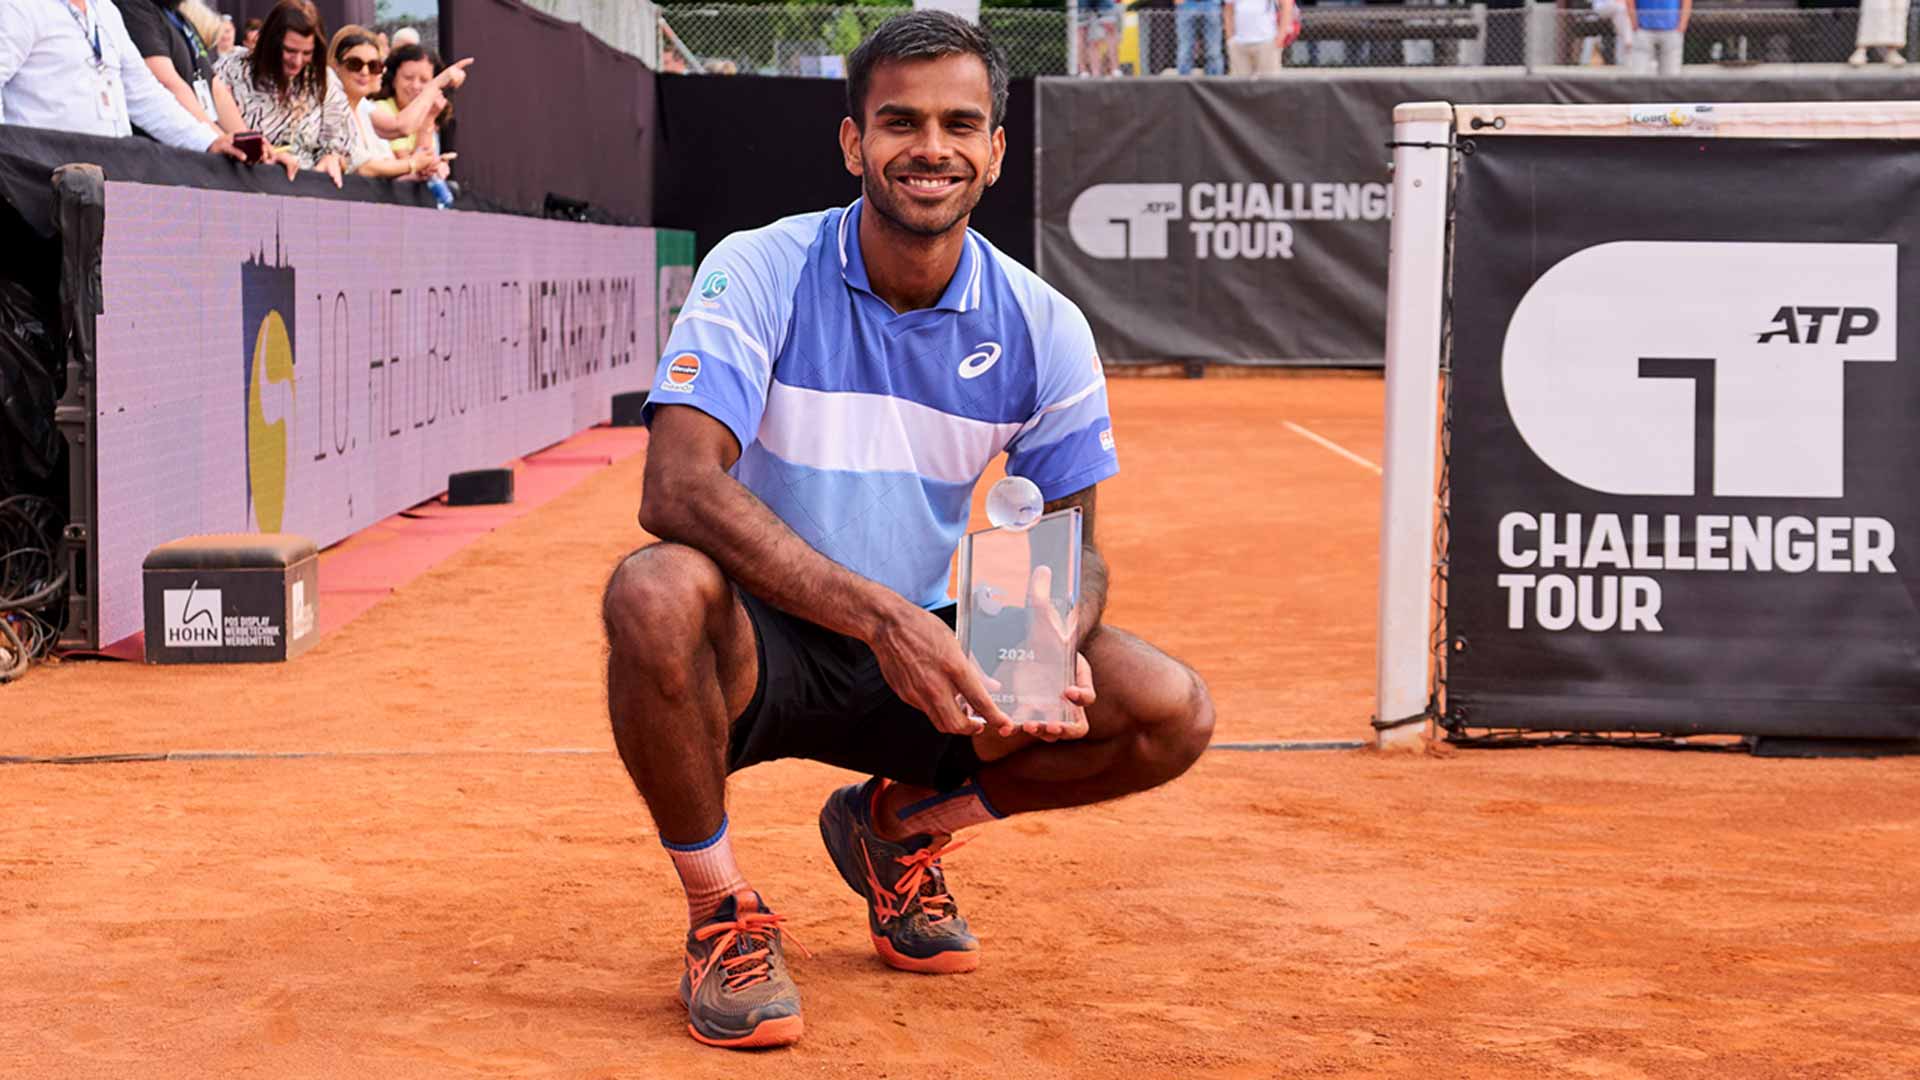 <a href='https://www.atptour.com/en/players/sumit-nagal/n897/overview'>Sumit Nagal</a> wins the ATP Challenger Tour 100 event in Heilbronn, Germany.